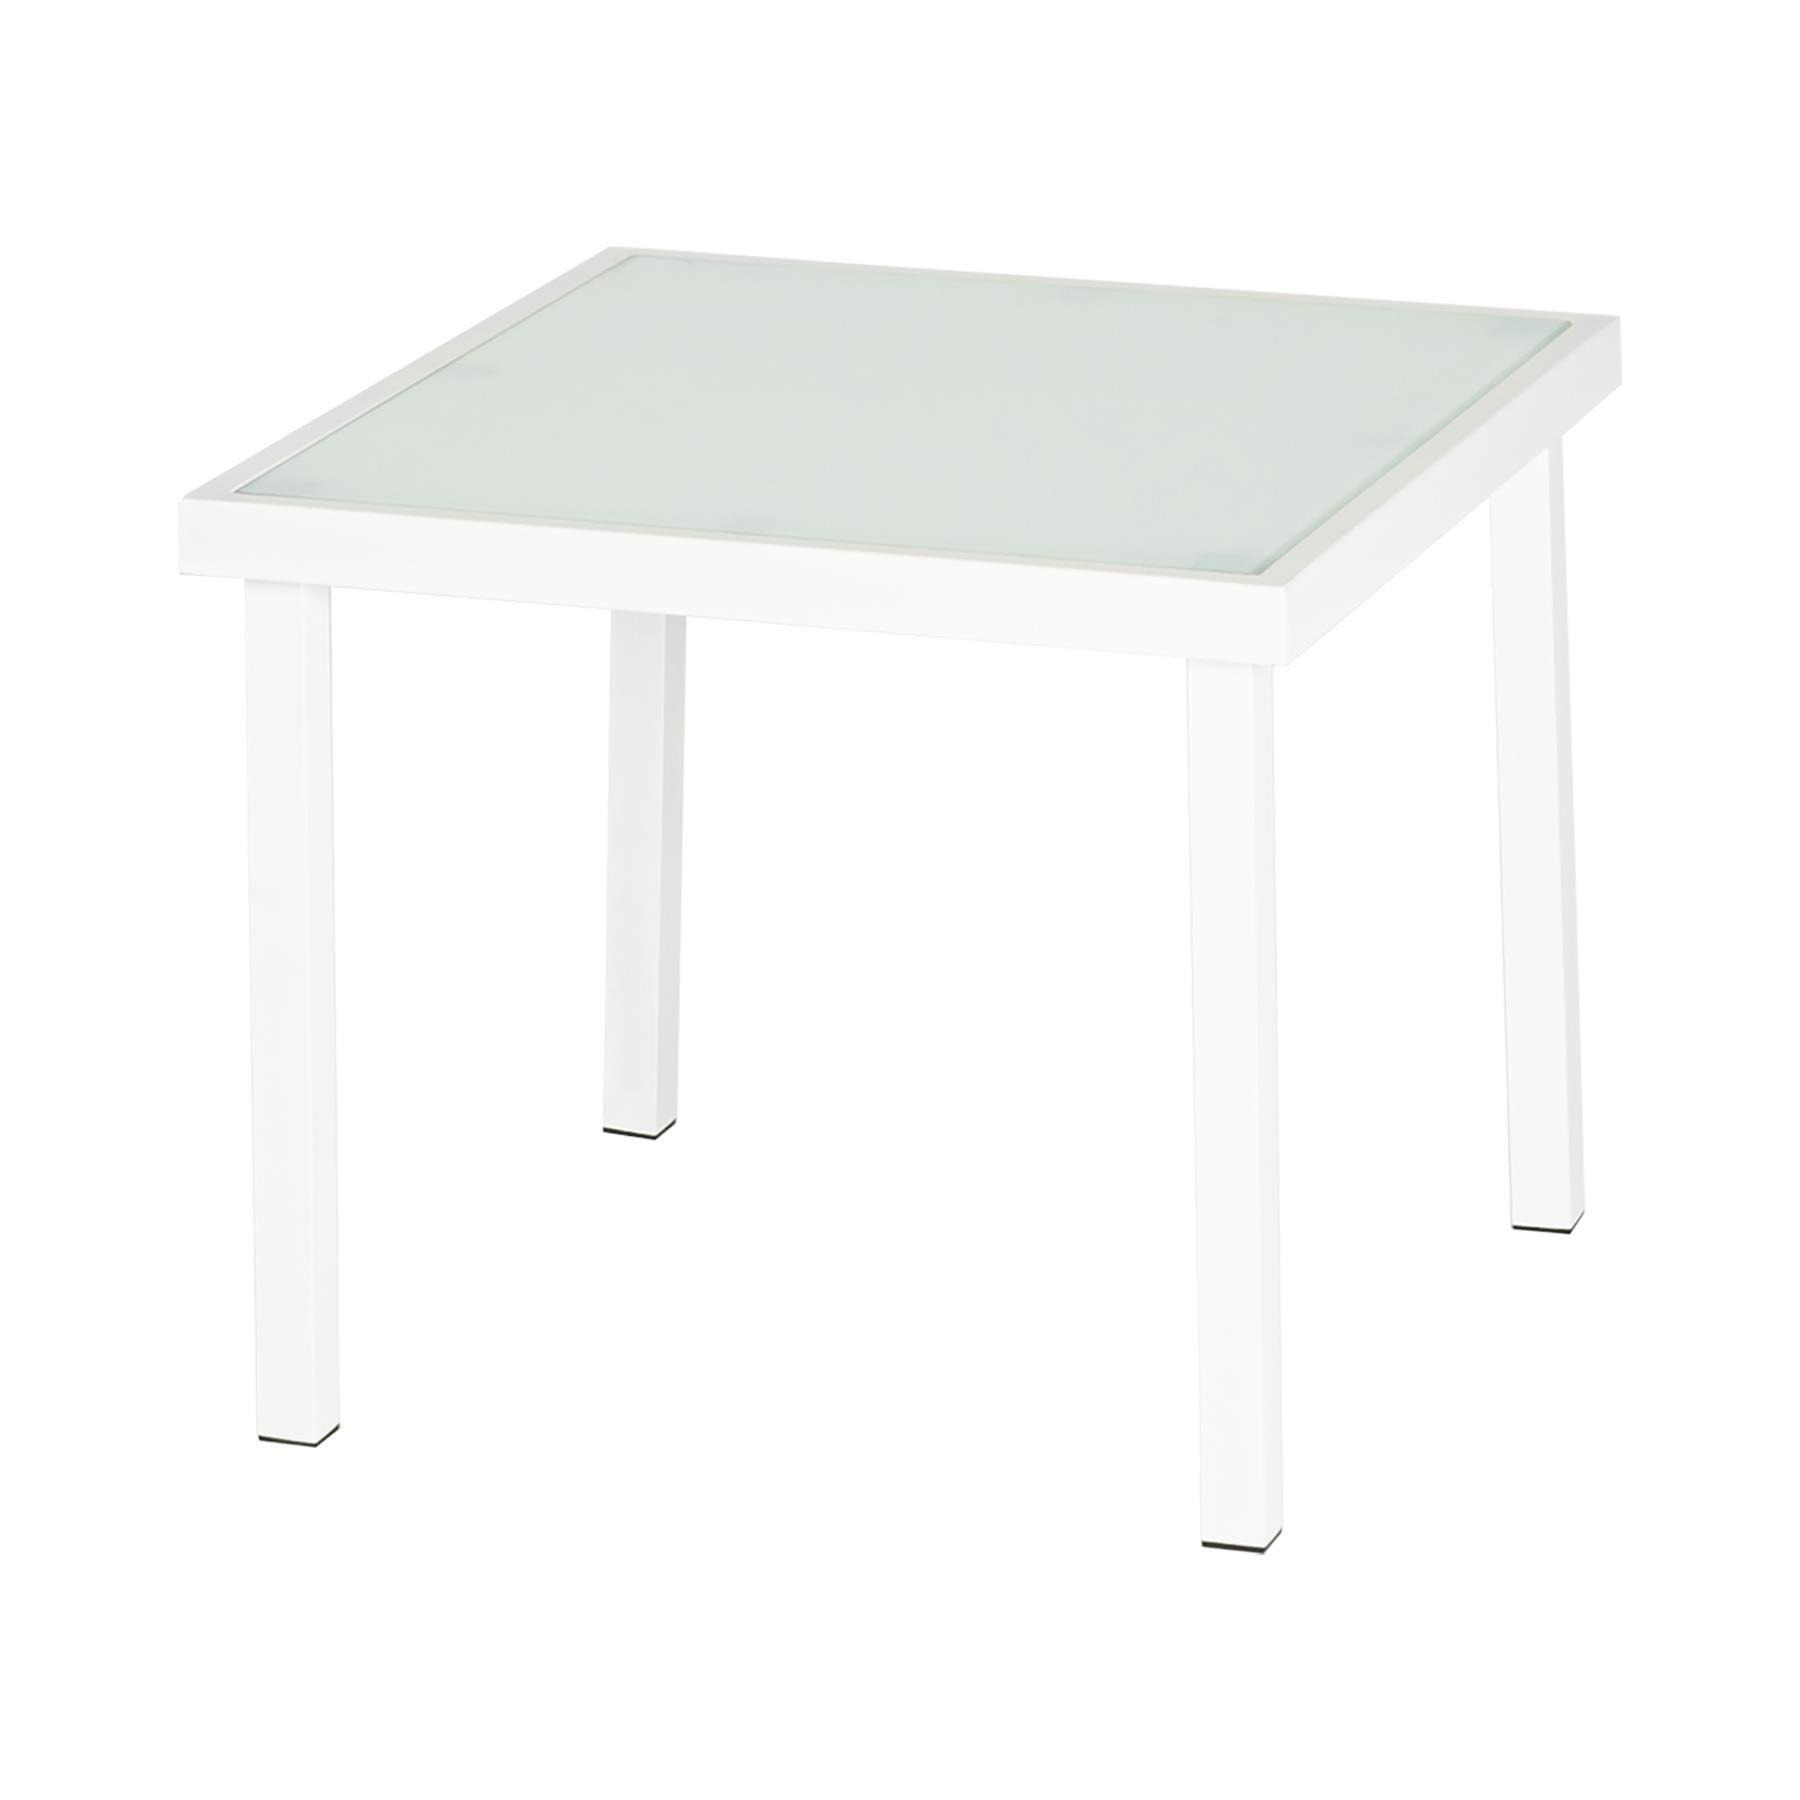 Sussex Garden Side Table 44 x 44cm Pack of 2 - image 1